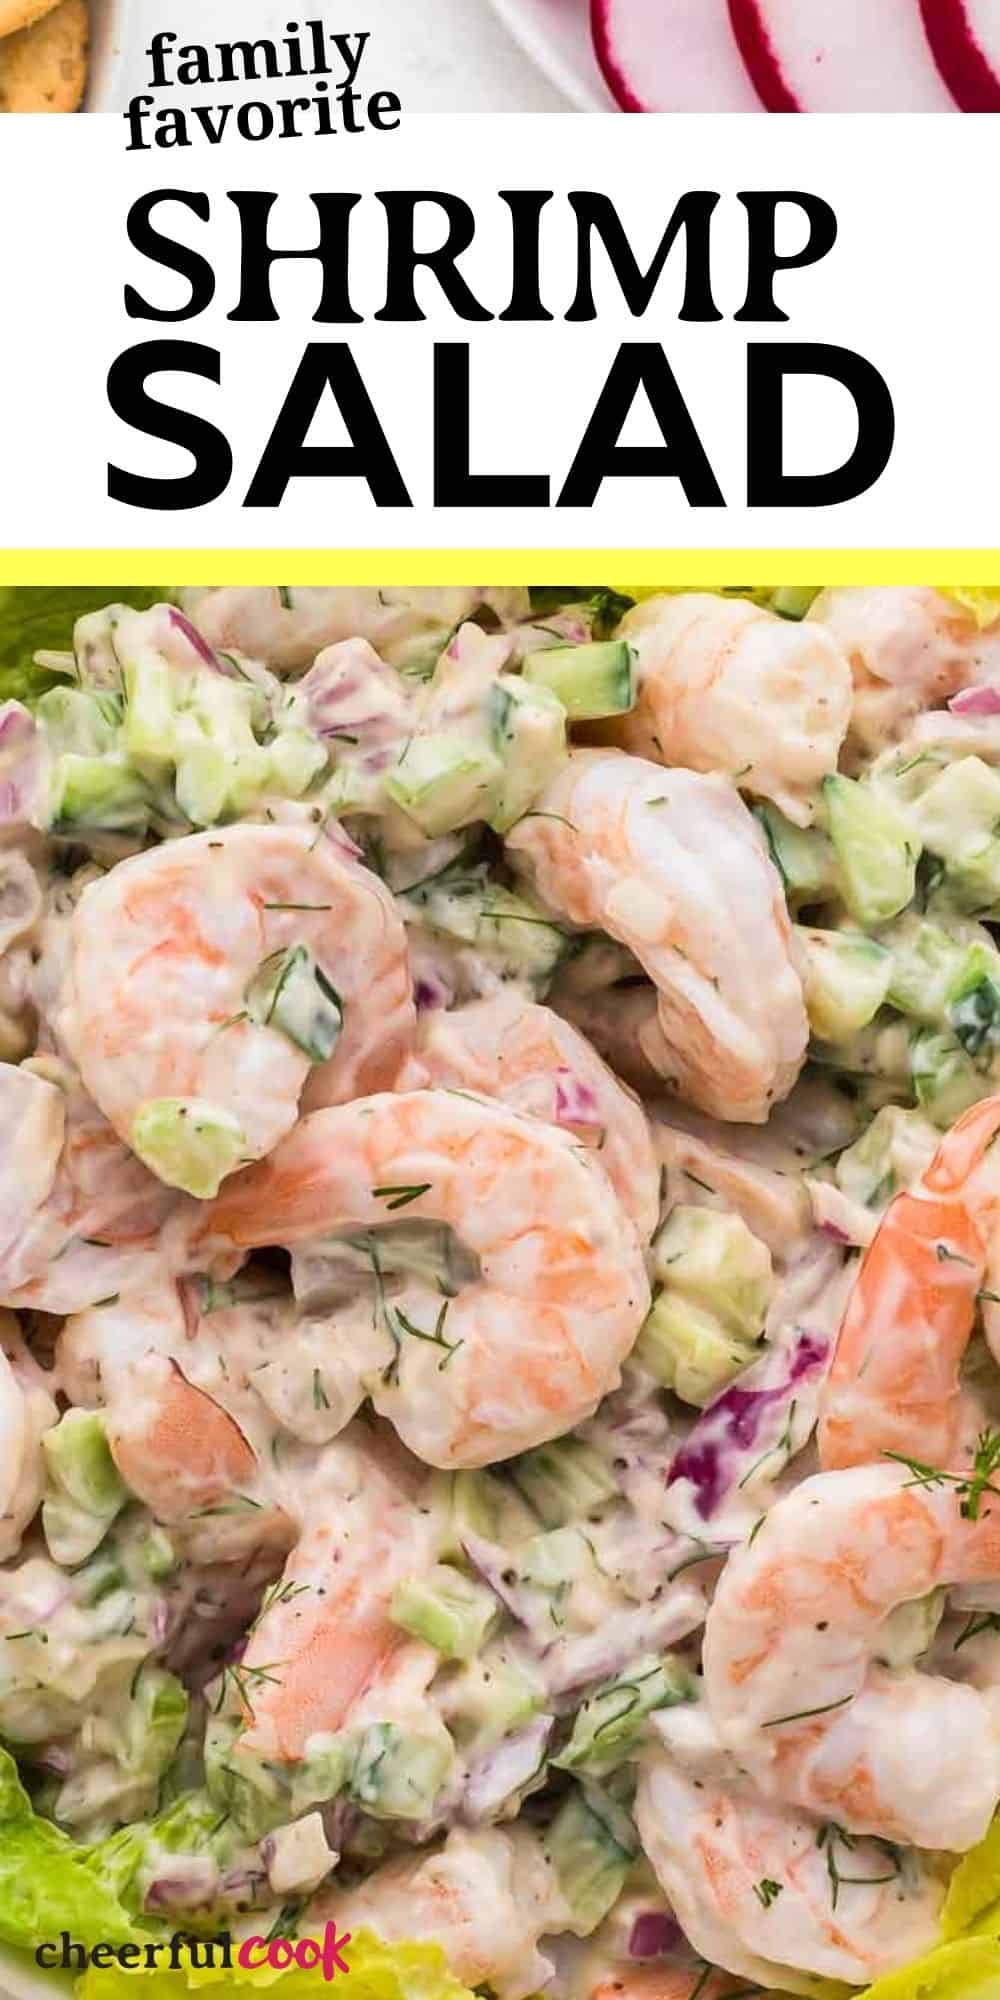 Shrimp Salad is delightfully light and refreshing. It's made with perfectly cooked shrimp, onion, celery, cucumber, dill, and mayonnaise. #cheerfulcook #shrimp #shrimpsalad #salad #mayonnaise  via @cheerfulcook